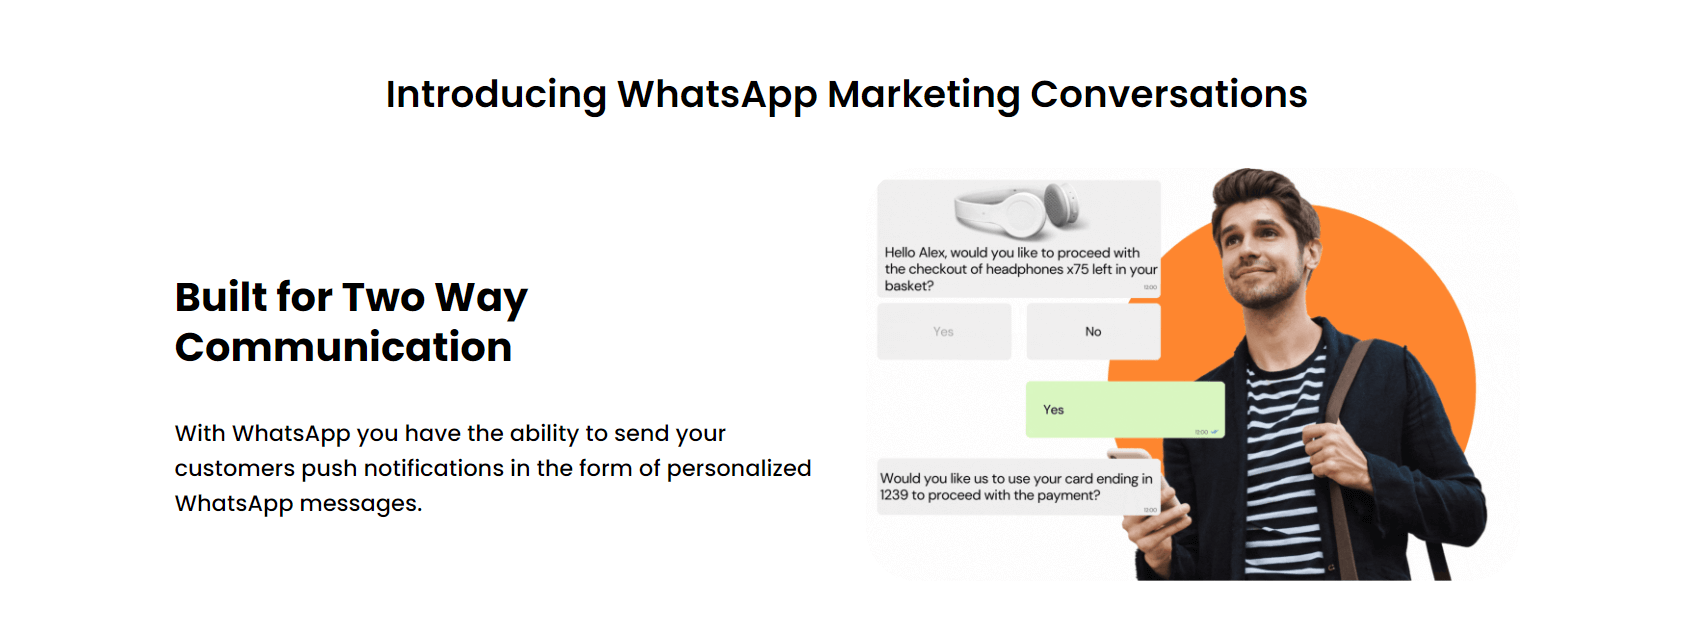 featuring a smartphone with WhatsApp messaging app, showing personalized messages being sent to different customer segments